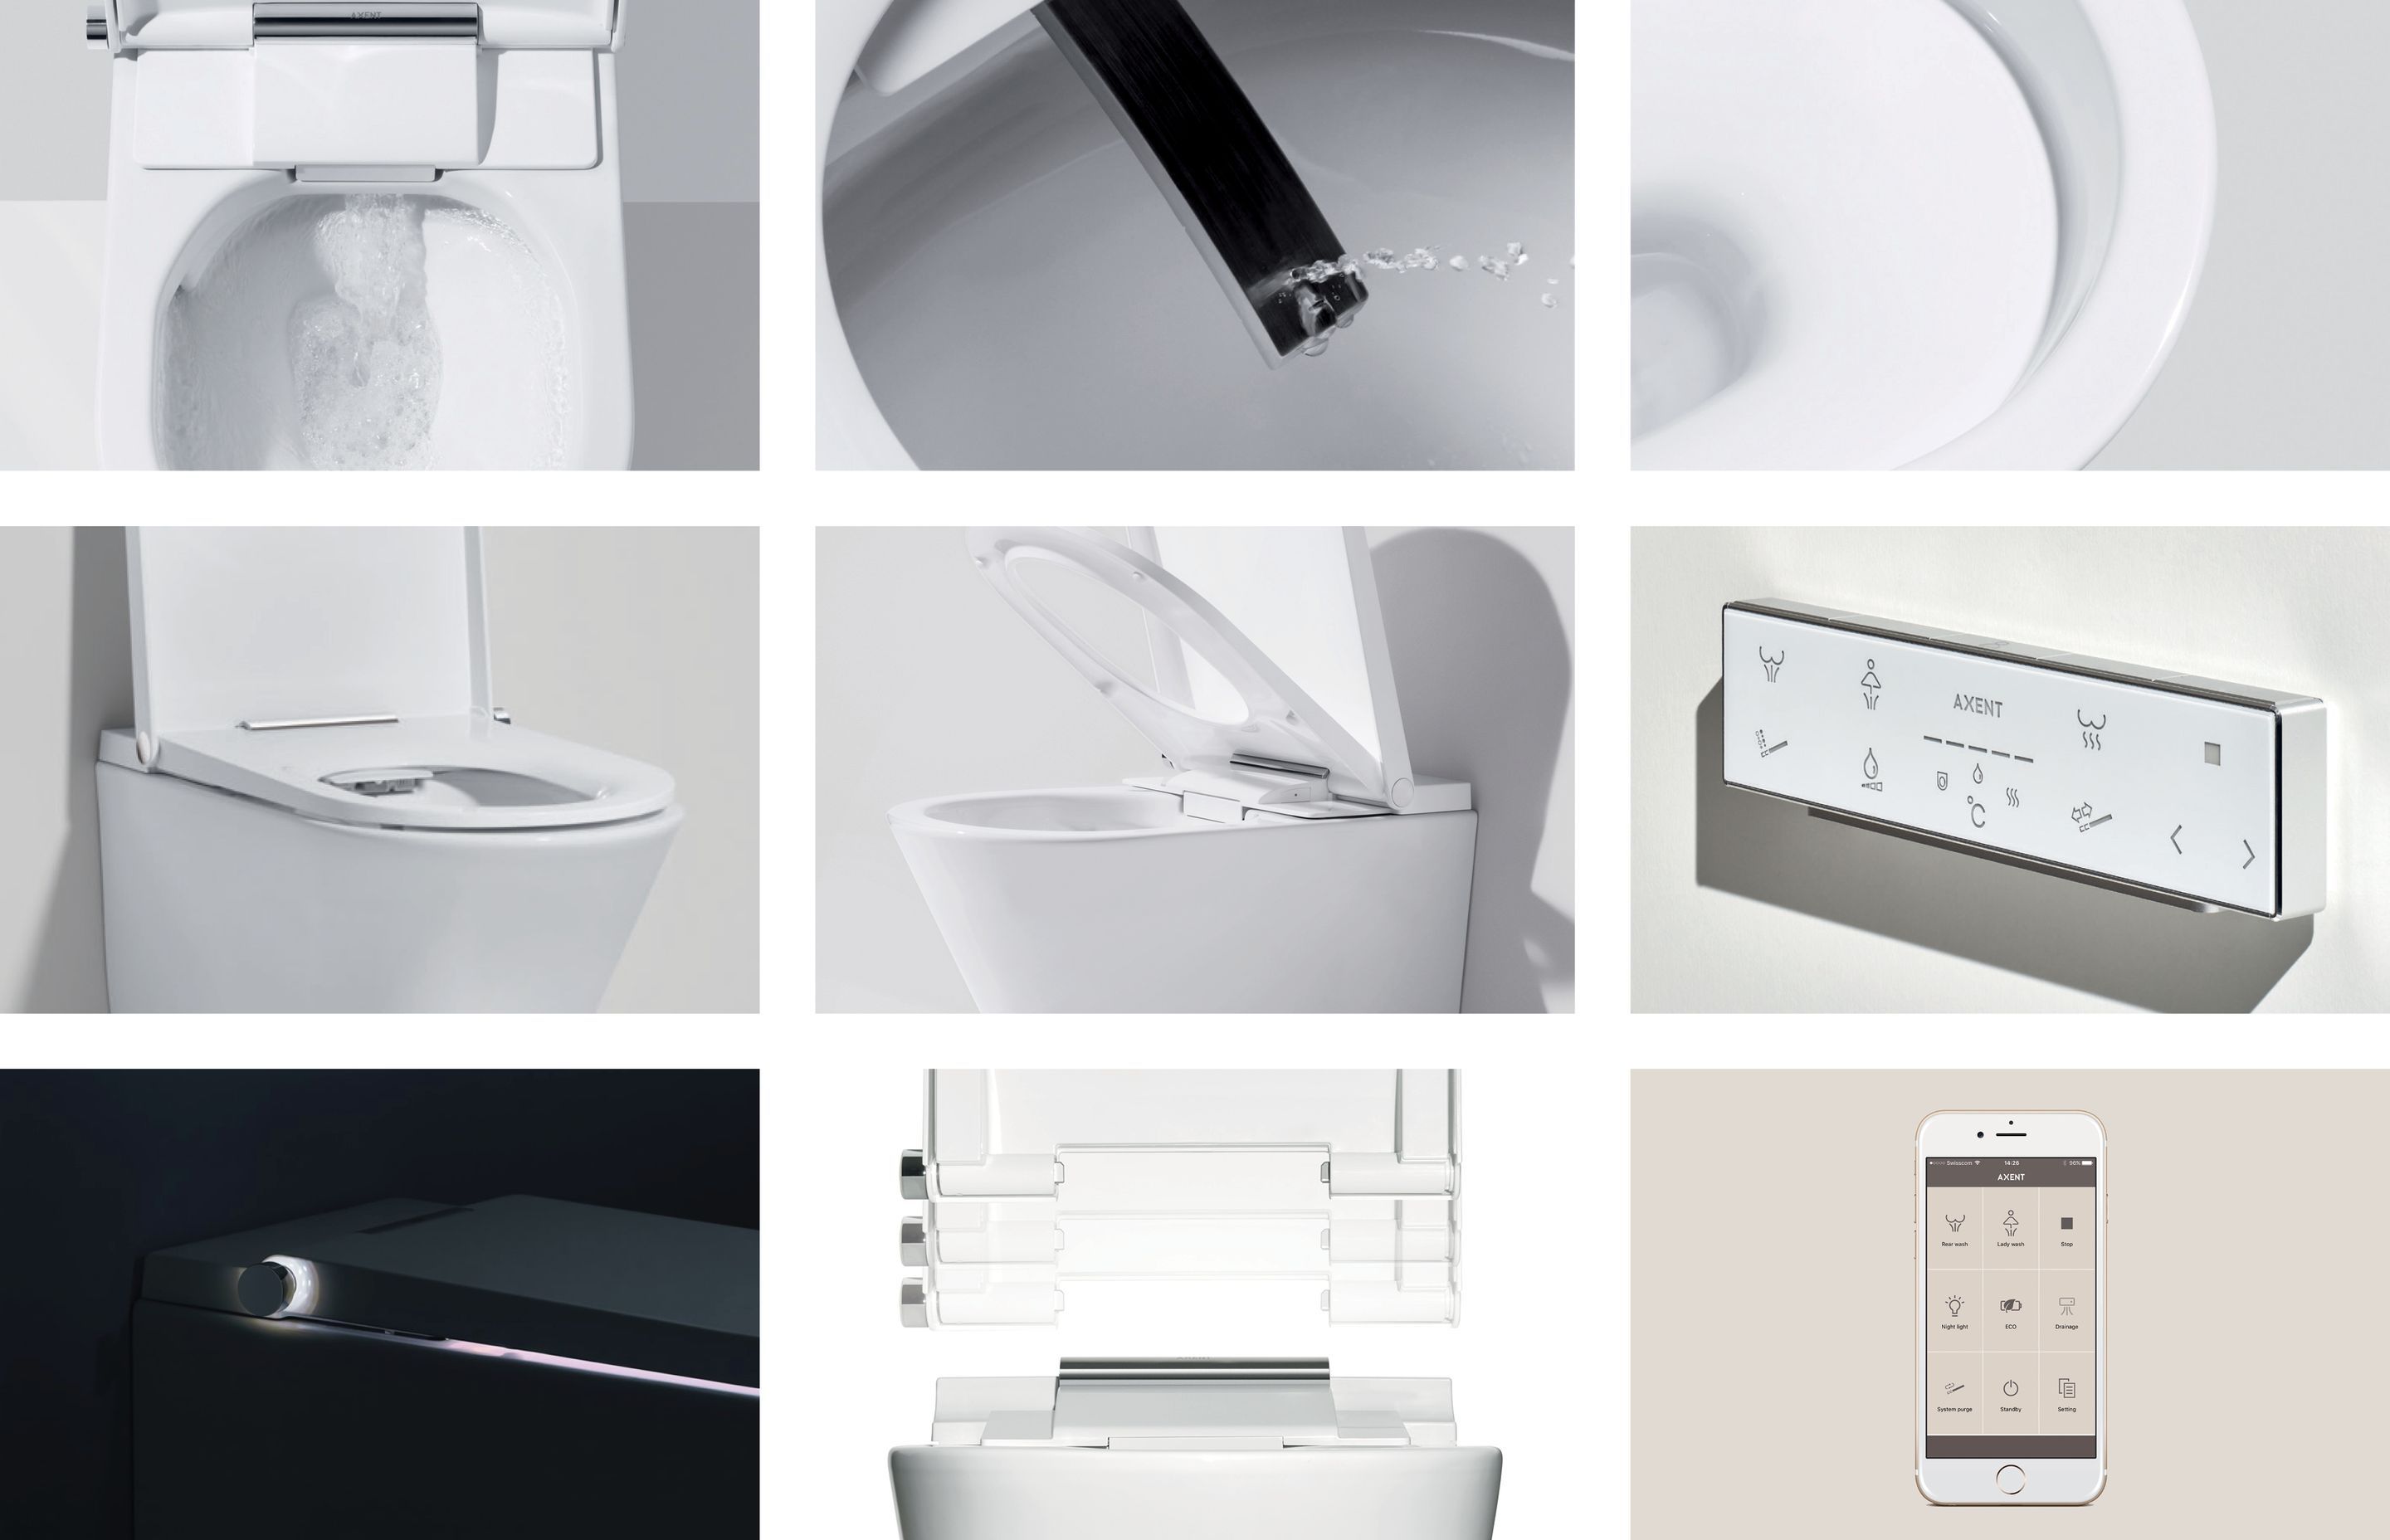 The latest in intelligent toilets: minimised to perfection